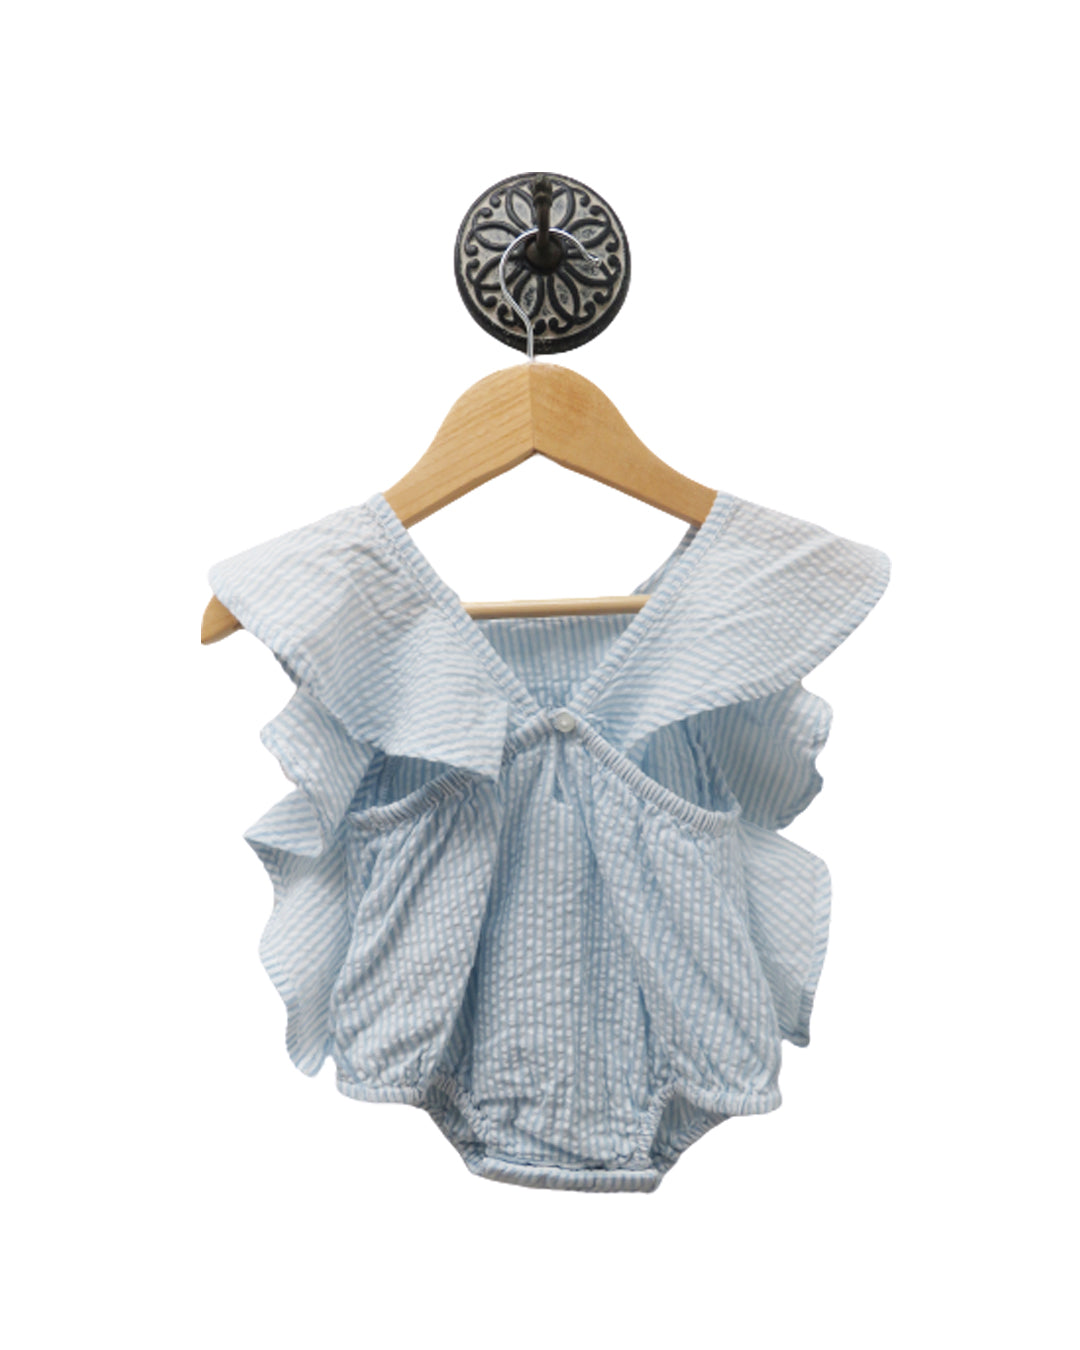 FRILLY BABY SUIT WITH BLUE AND WHITE STRIPES